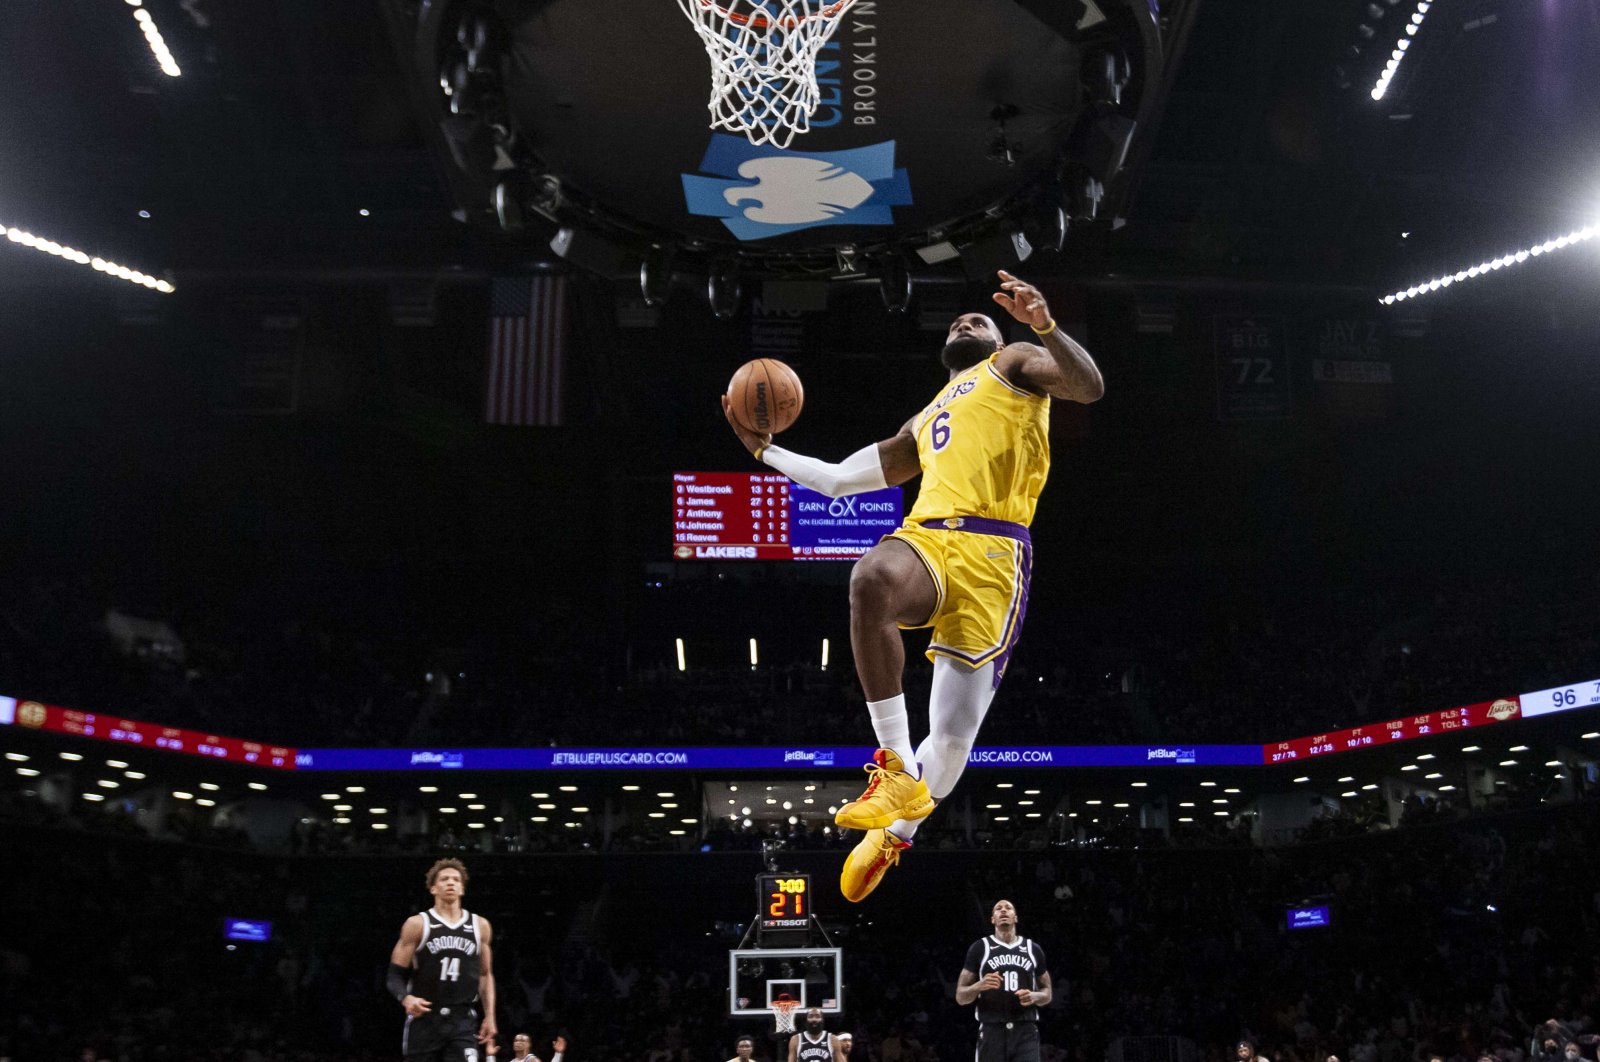 Lakers&#039; LeBron James dunks against the Nets in an NBA game, New York City, U.S., Jan. 25, 2022. (AFP Photo)